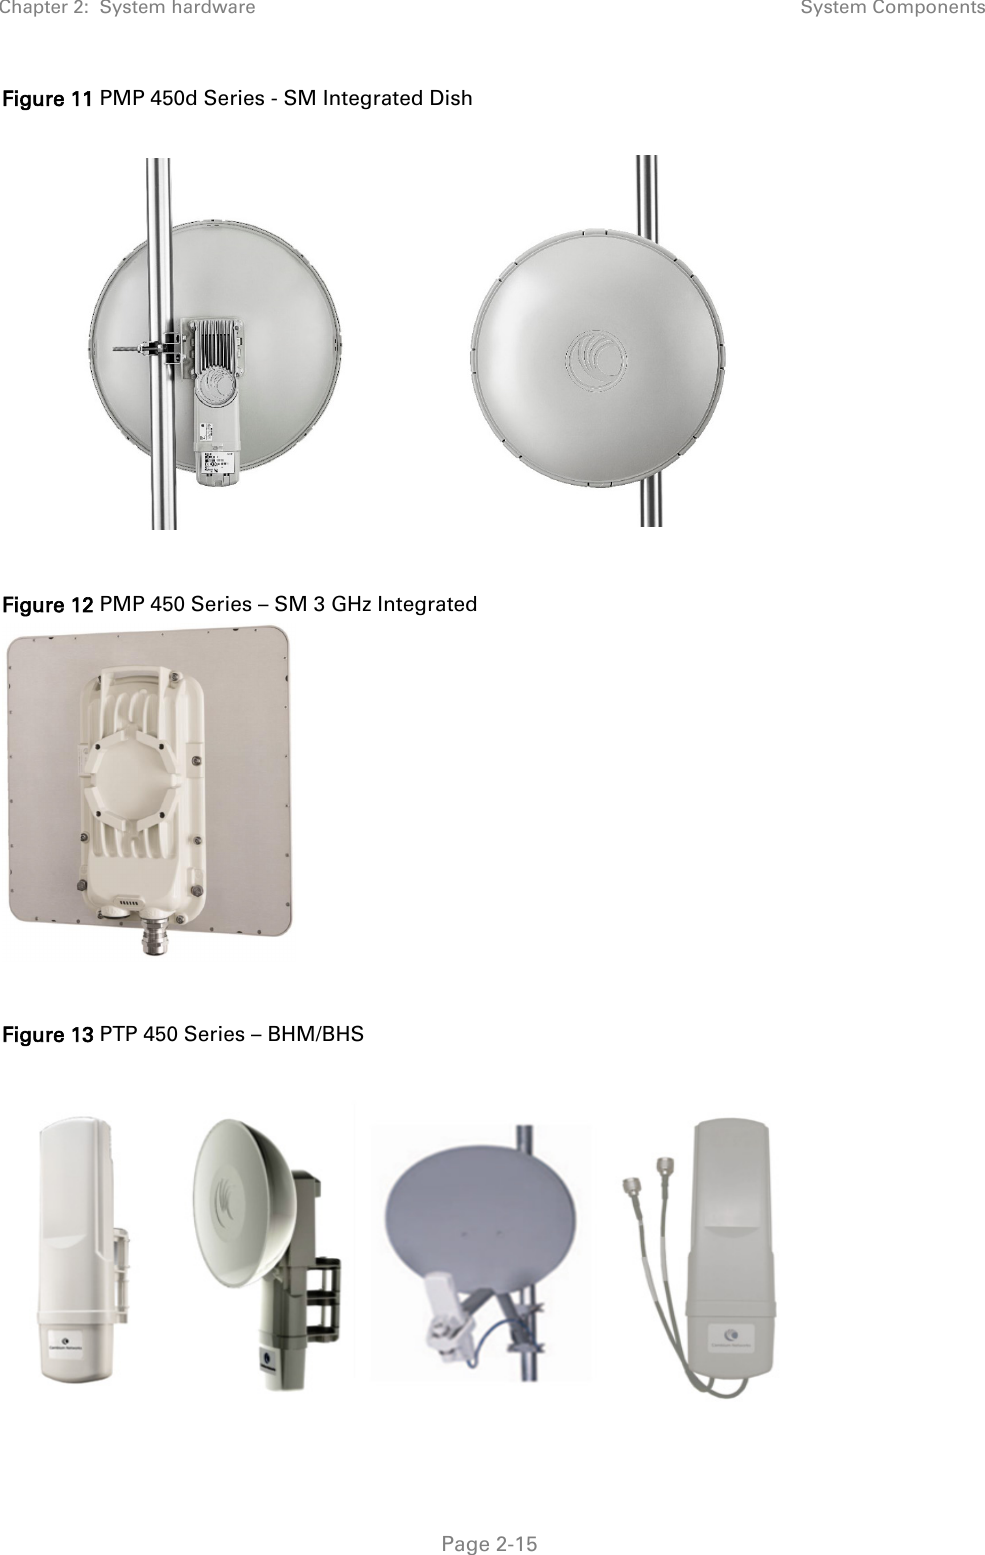 Chapter 2:  System hardware System Components   Page 2-15 Figure 11 PMP 450d Series - SM Integrated Dish    Figure 12 PMP 450 Series – SM 3 GHz Integrated    Figure 13 PTP 450 Series – BHM/BHS   